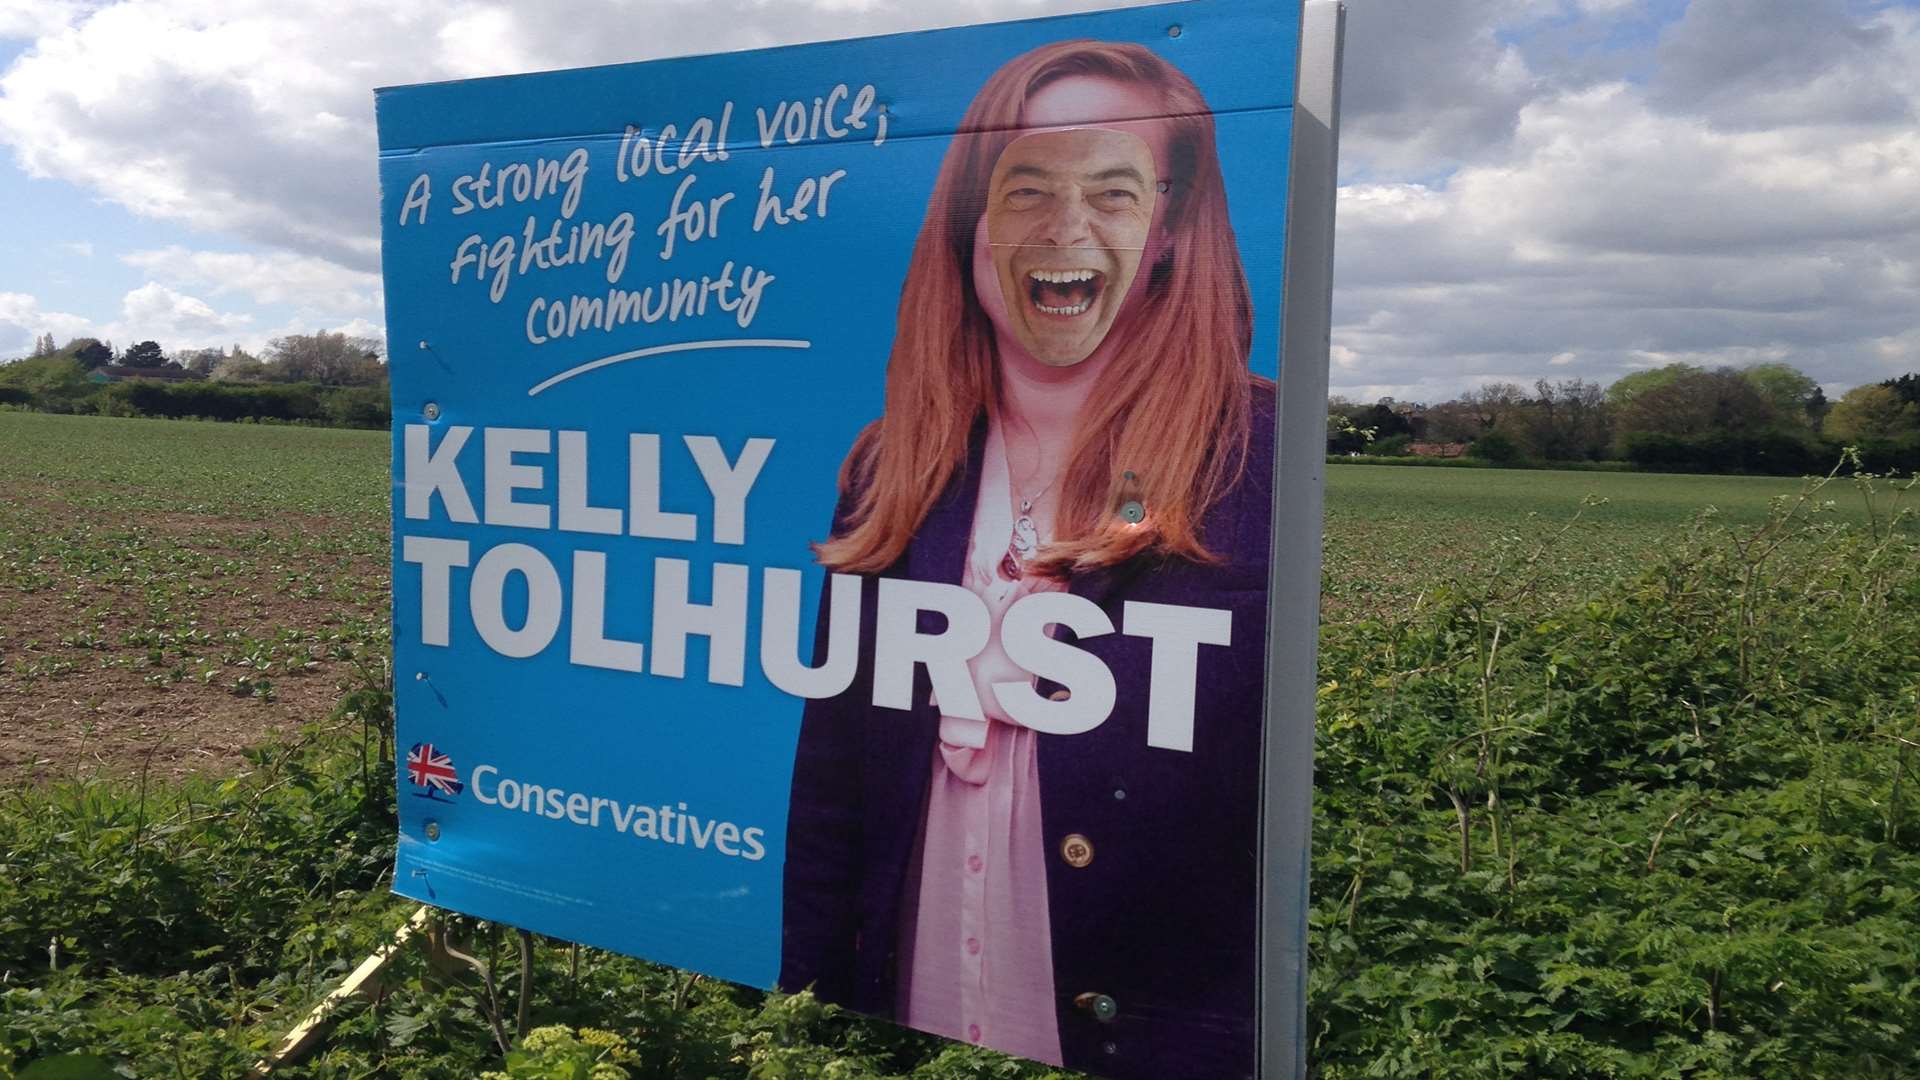 Nigel Farage's face has been put on top of Kelly Tolhurst's election sign.